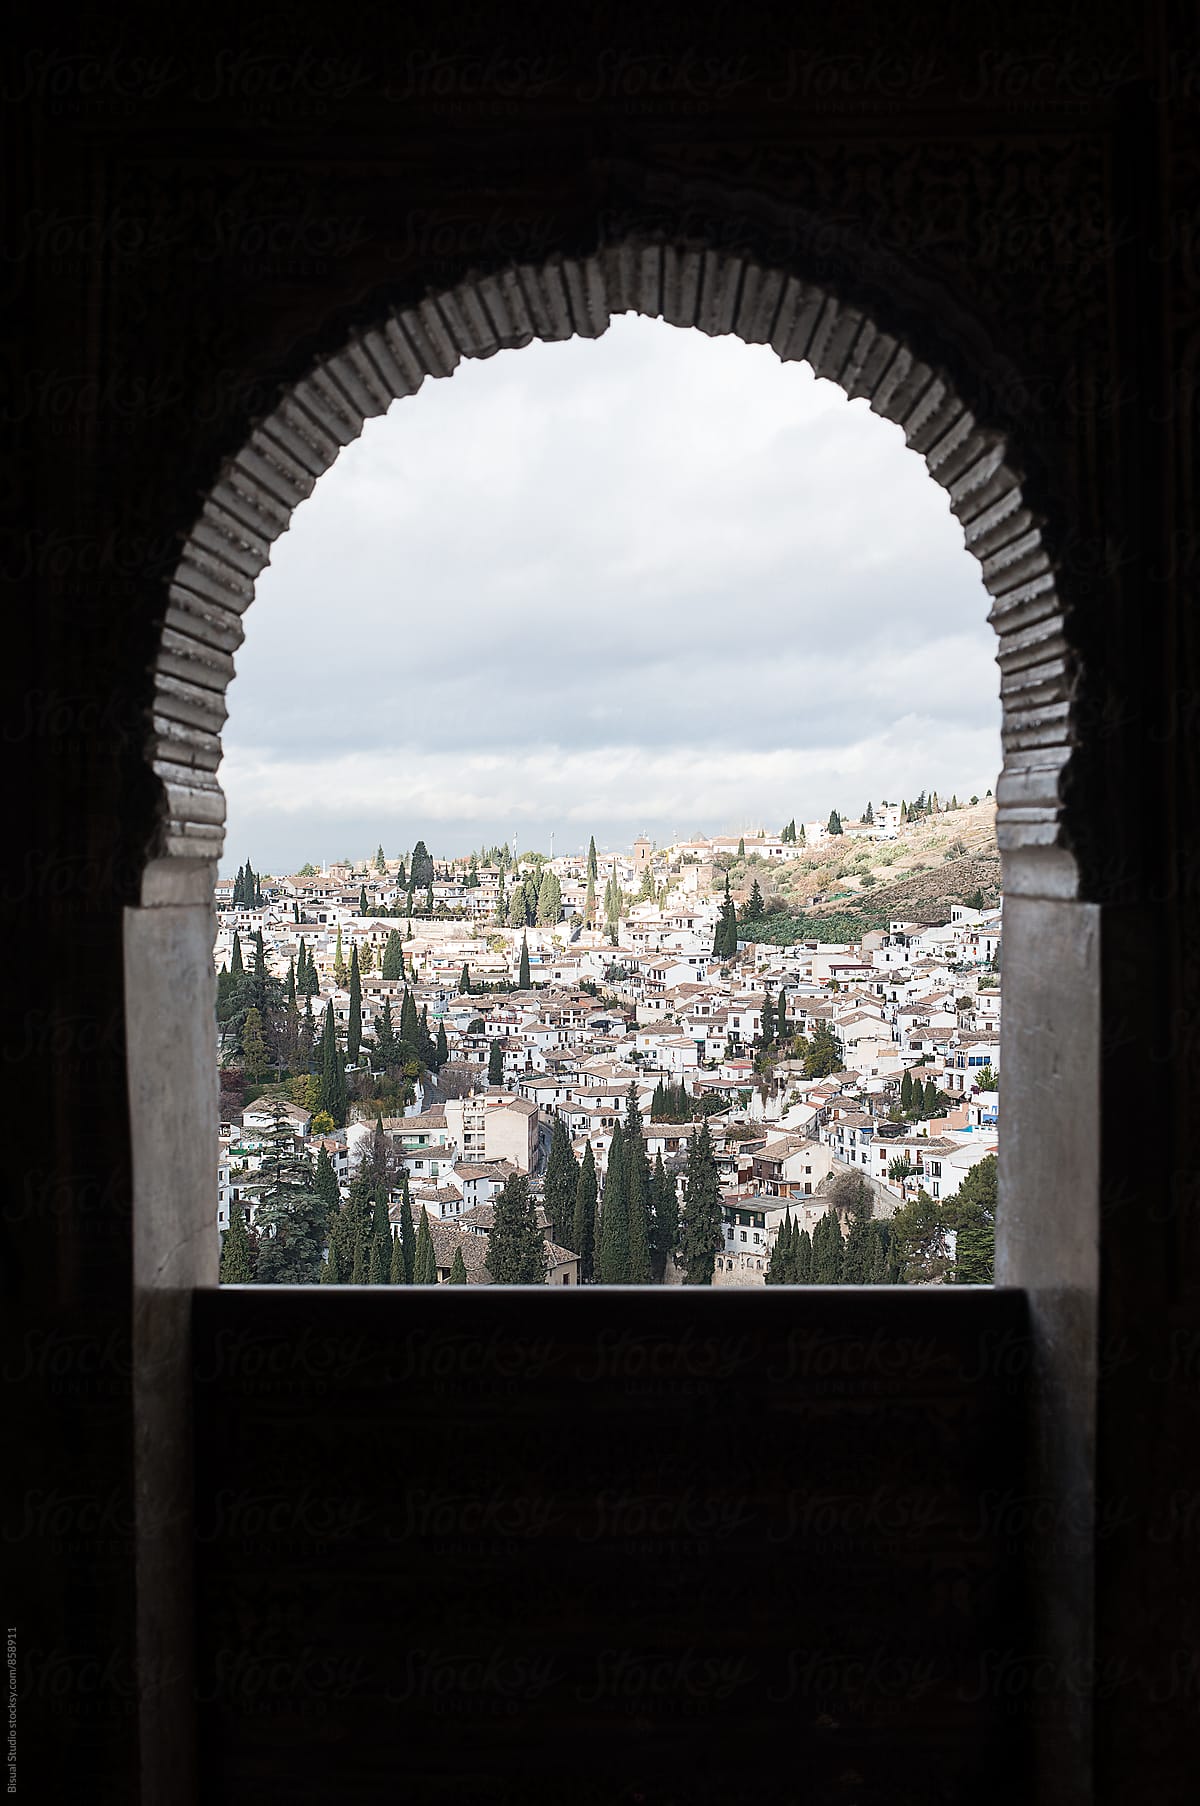 Views of the neighborhood of Albayzin from a window of the Alhambra